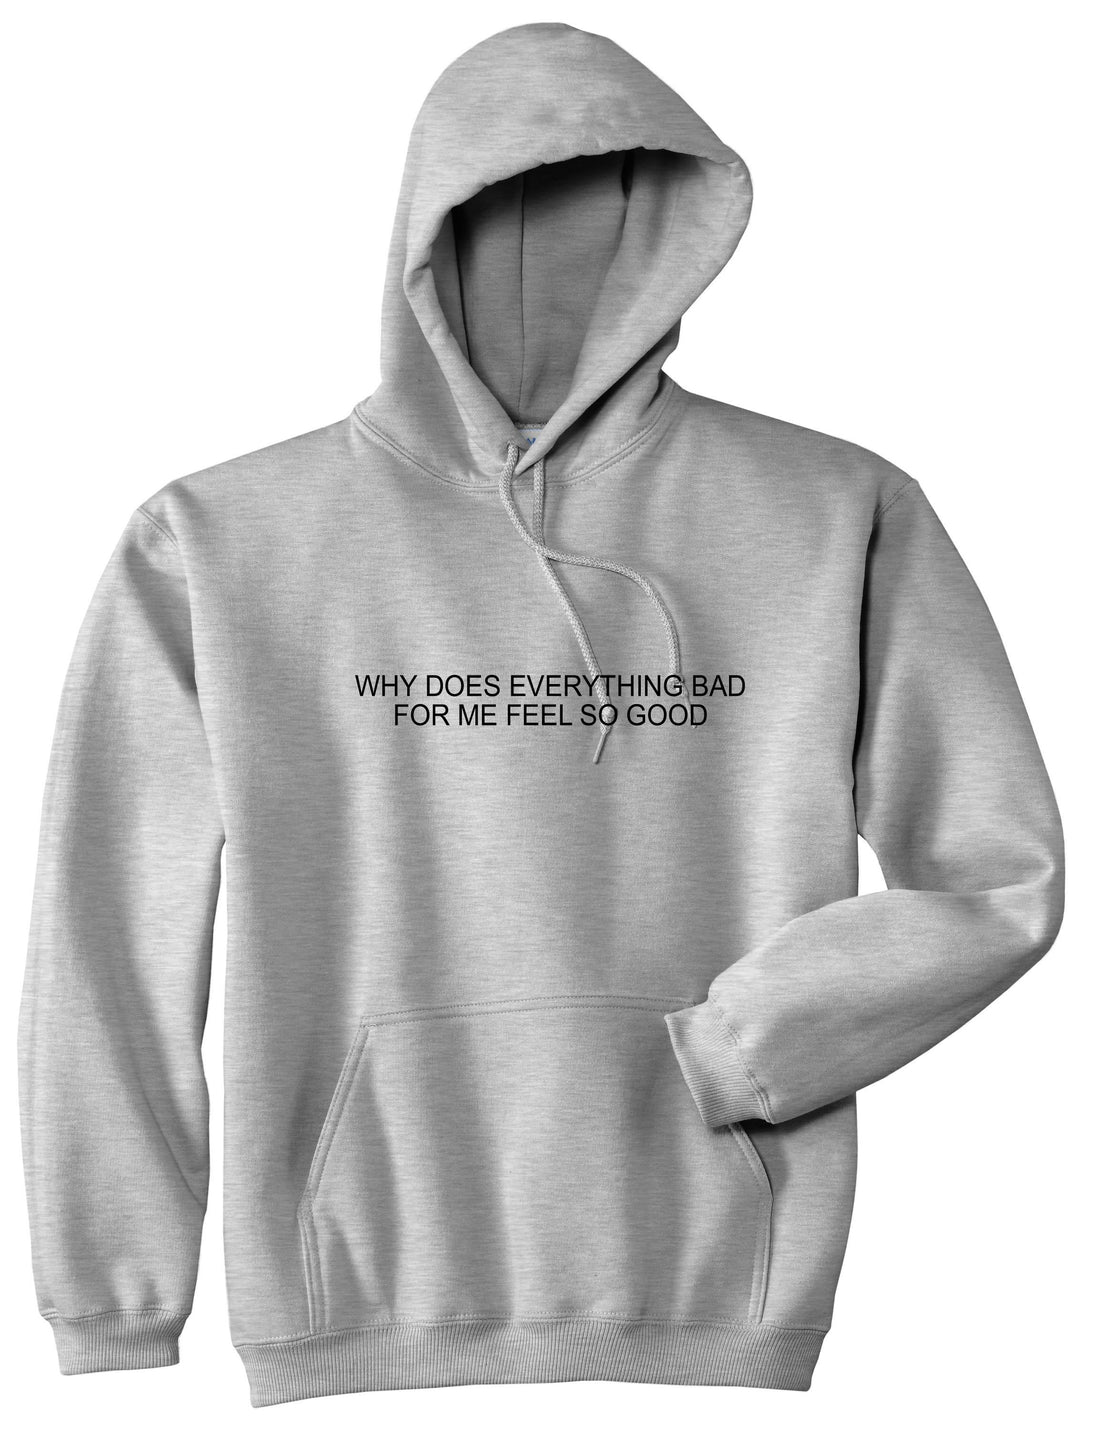 Why Does Everything Bad For Me Feel So Good Mens Pullover Hoodie Sweatshirt Grey